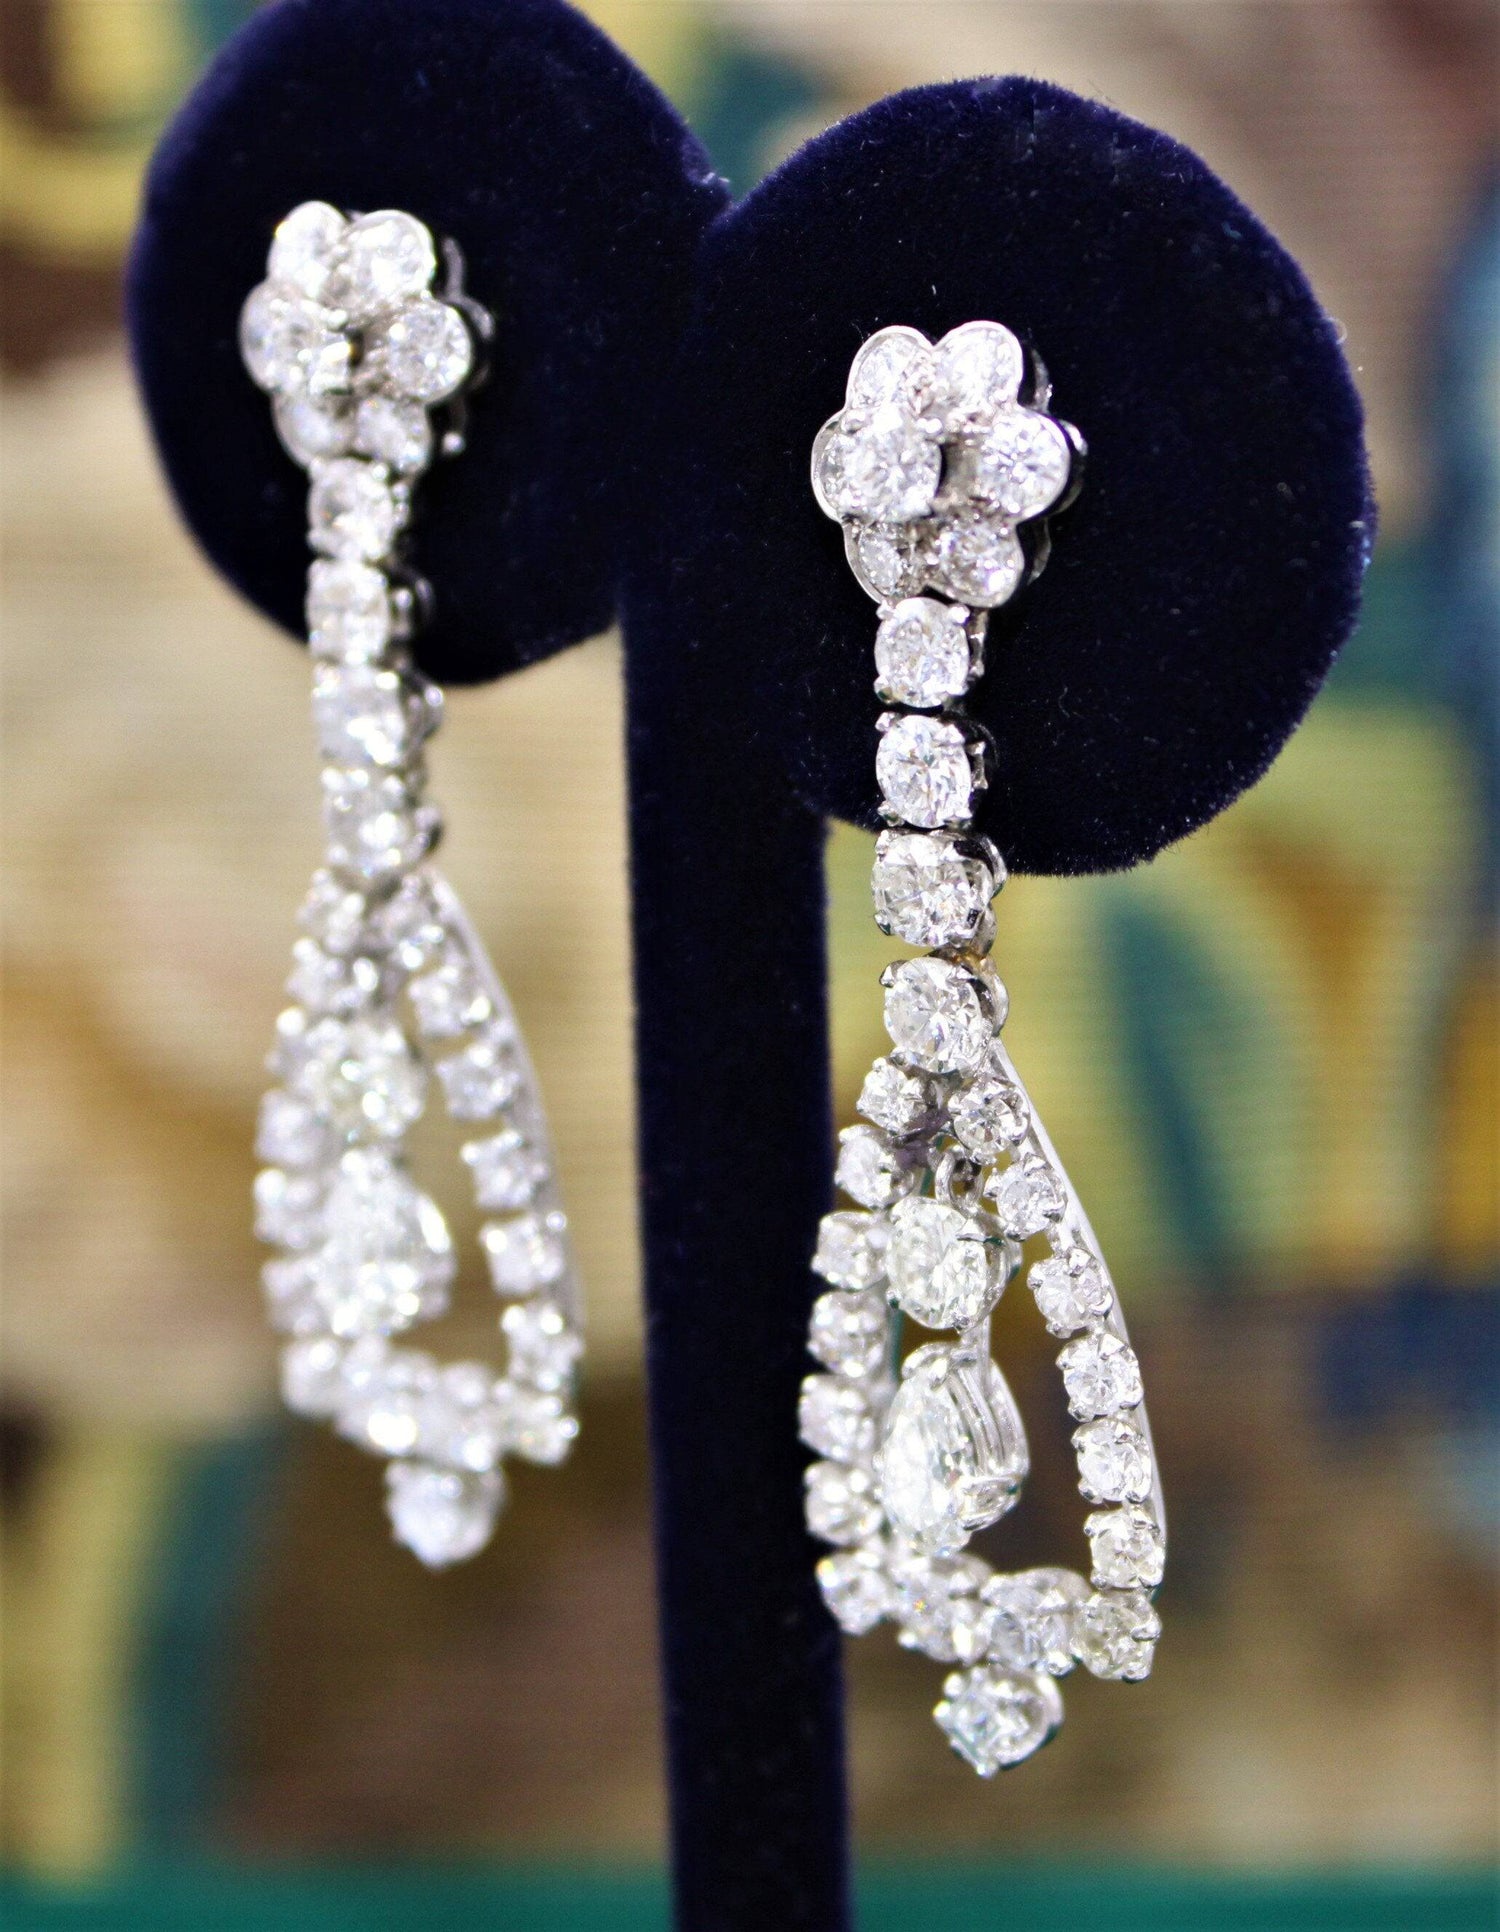 A magnificent pair of 8.30ct Diamond Drop Earrings set in 18ct White Gold, Circa 1955 - Robin Haydock Antiques